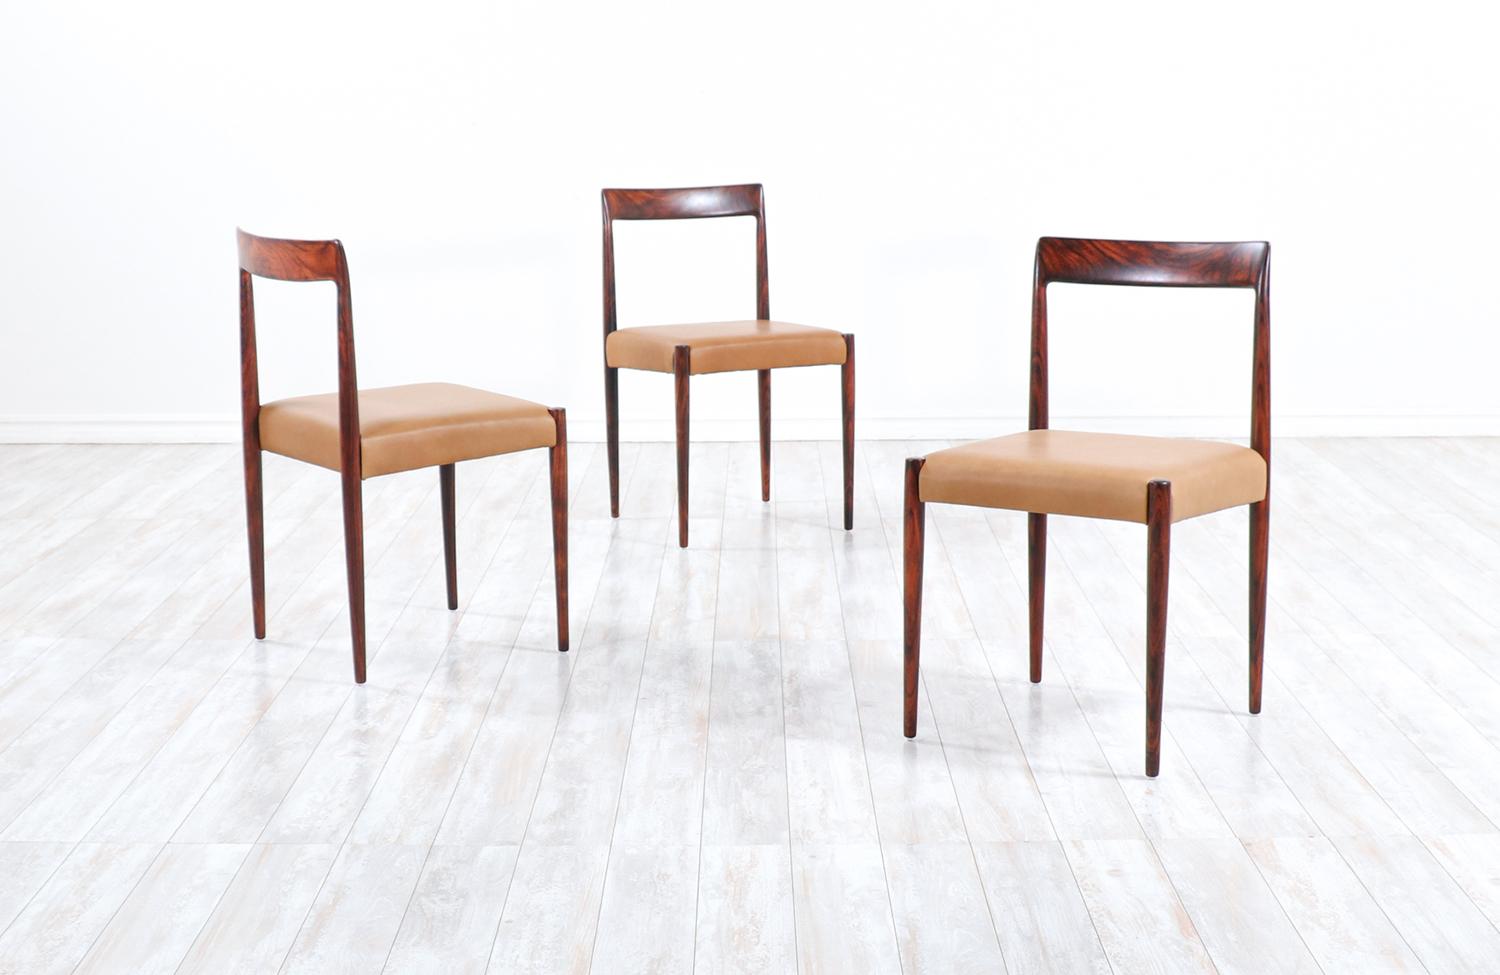 Set of 10 Mid-Century Modern Rosewood and Leather Dining Chairs by Lübke 1